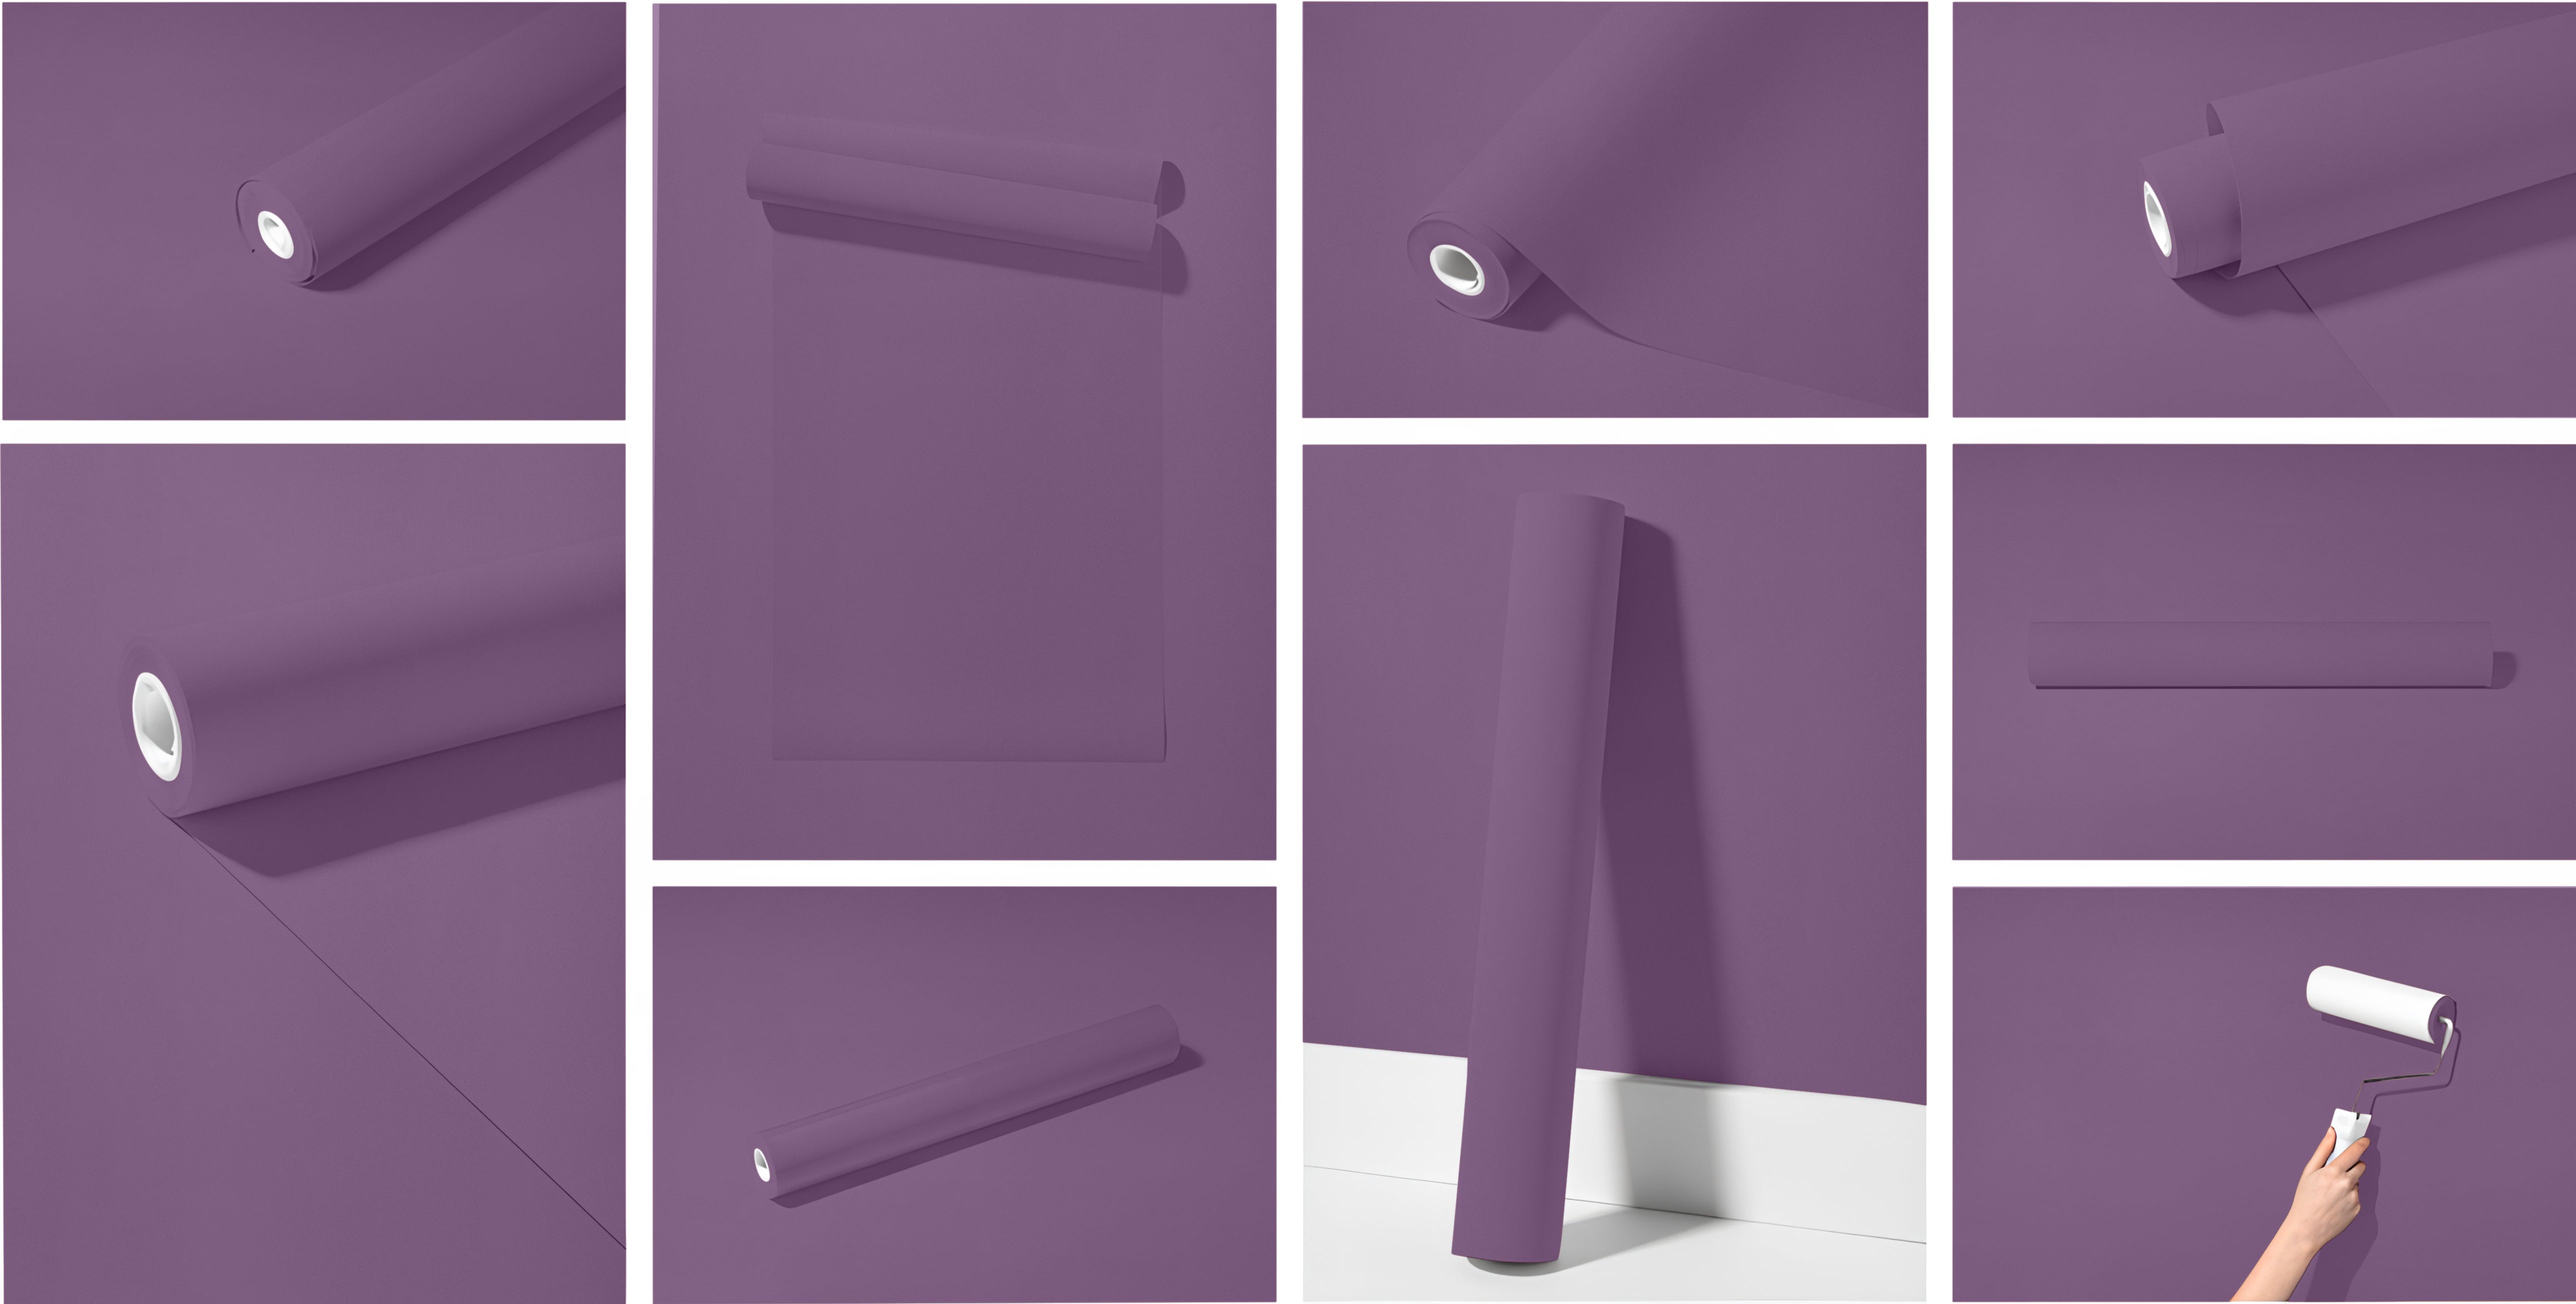 Peel & Stick Removable Re-usable Paint - Color RAL 4001 Red Lilac - offRAL™ - RALRAW LLC, USA